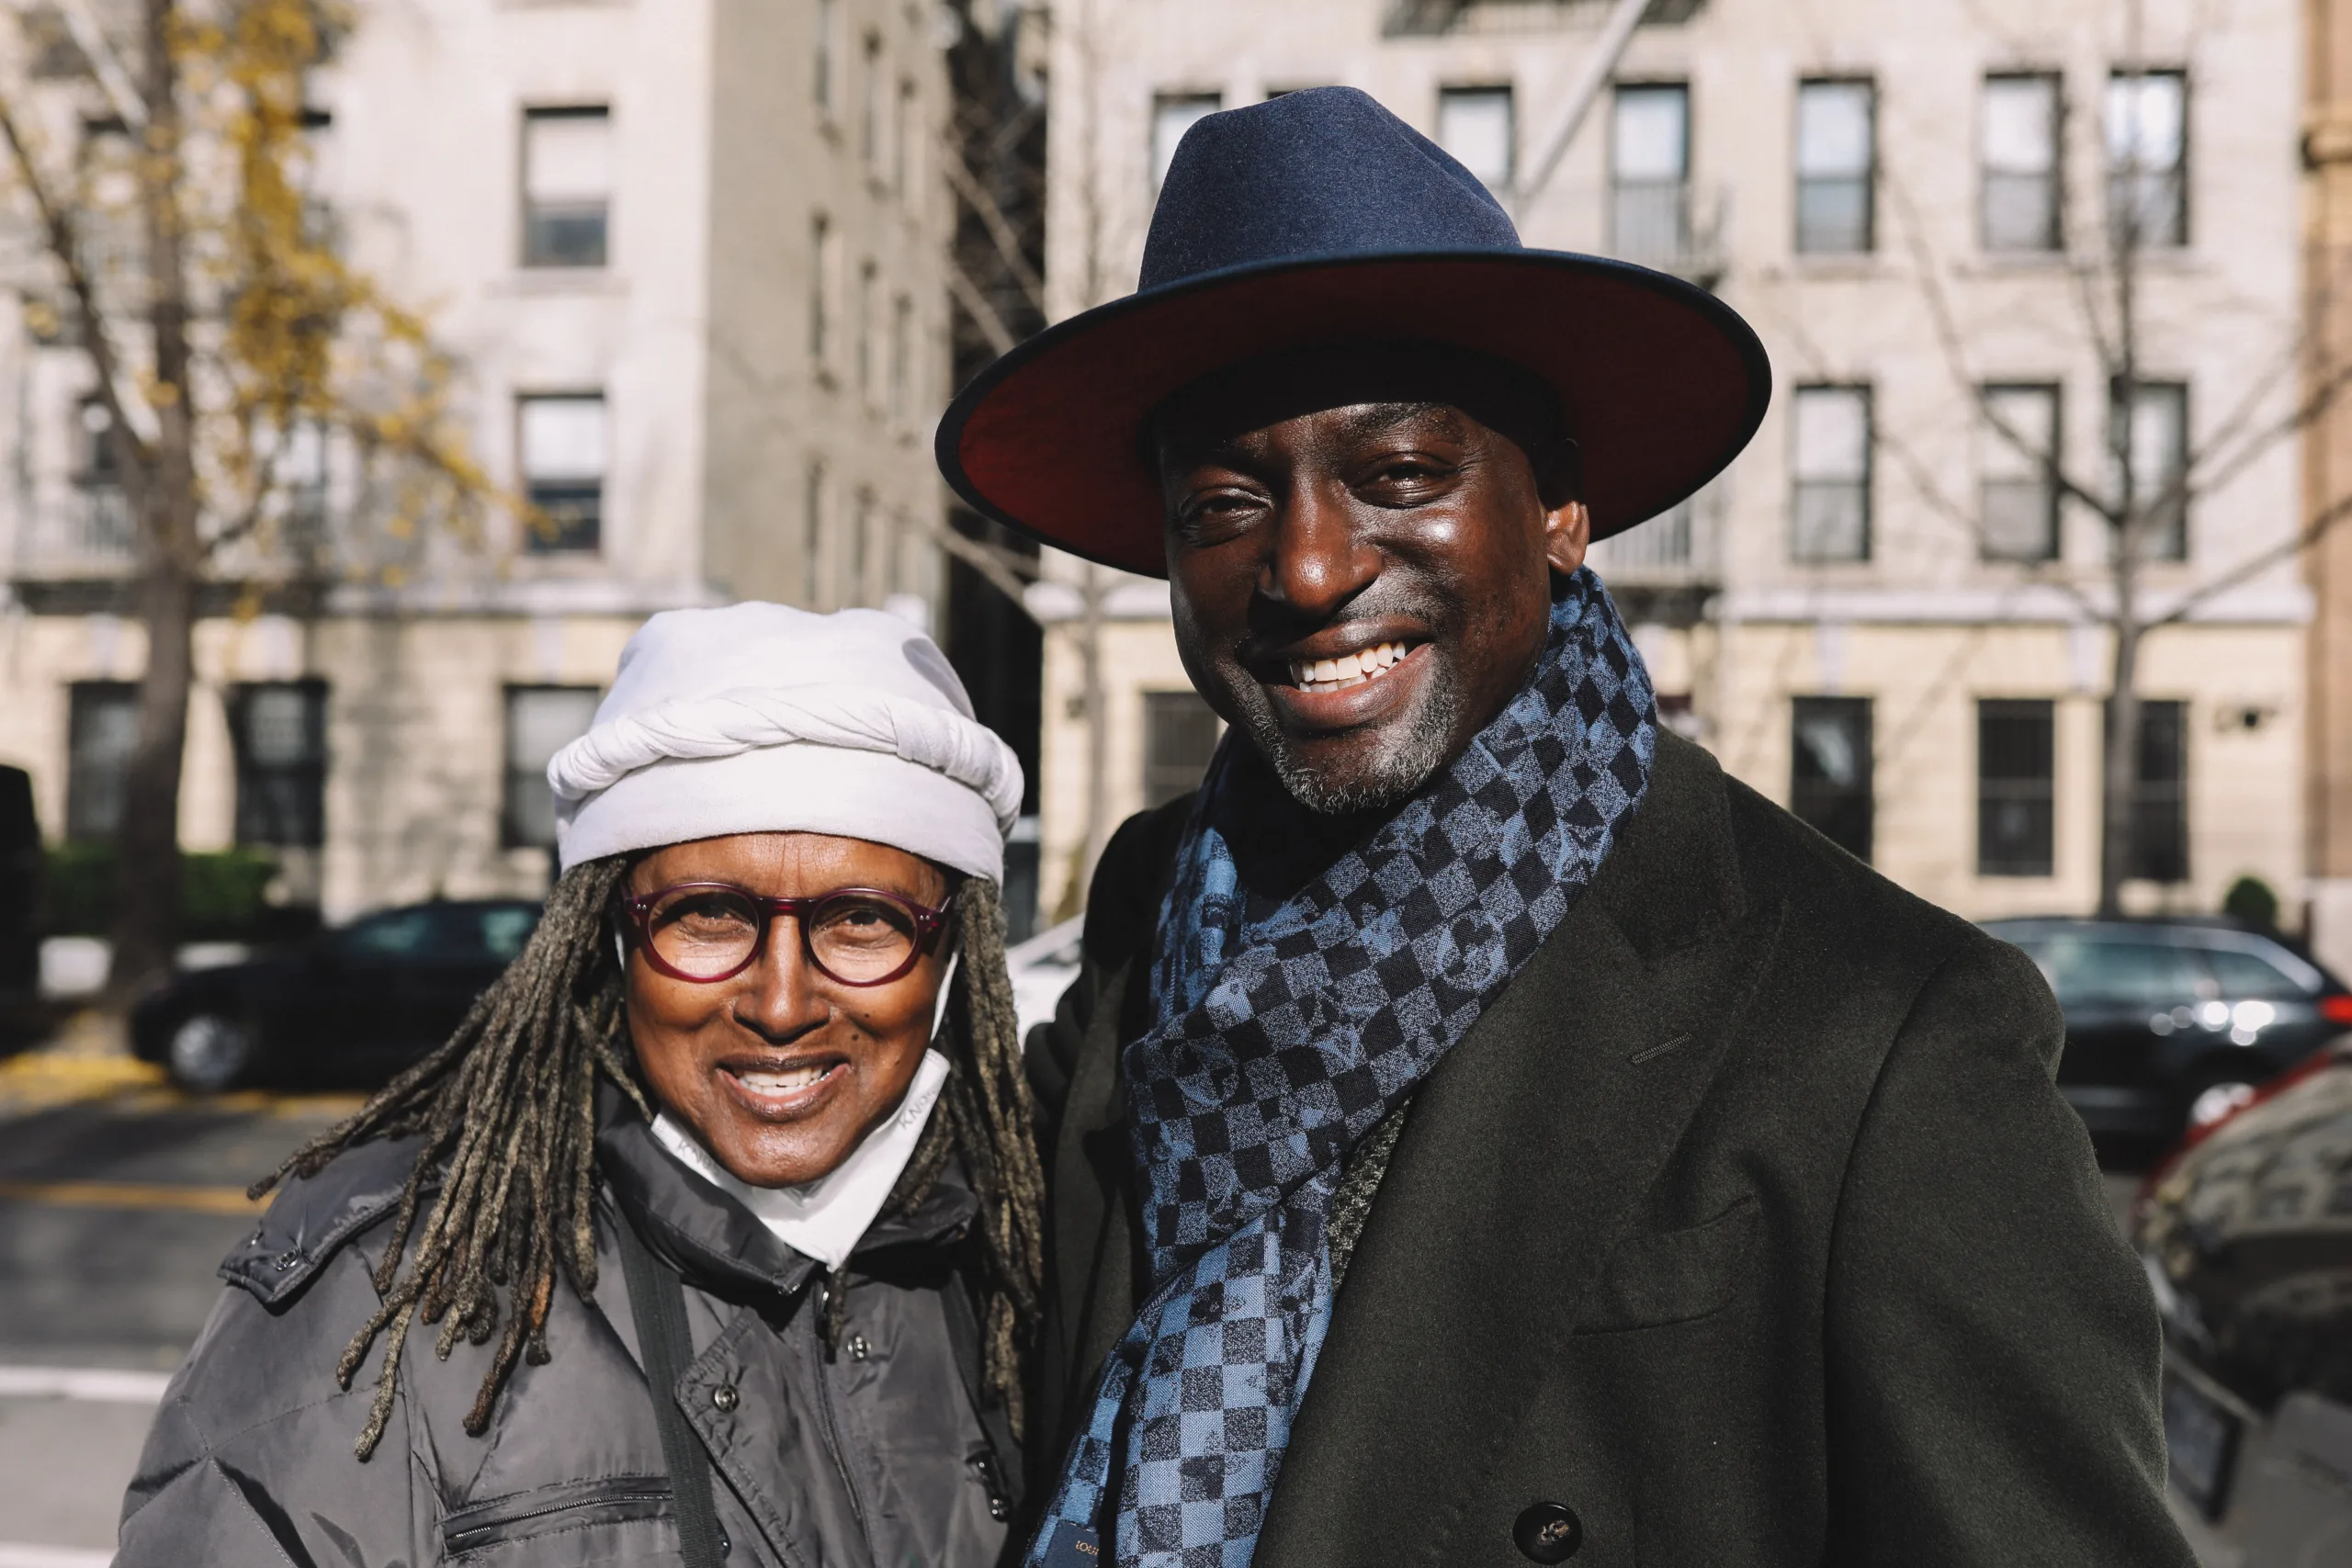 Yusef Salaam and his mother, Sharonne, at the unveiling of the “Gate of the Exonerated” in New York City’s Central Park on Dec. 19, 2022. (Image: Jeenah Moon/Innocence Project)